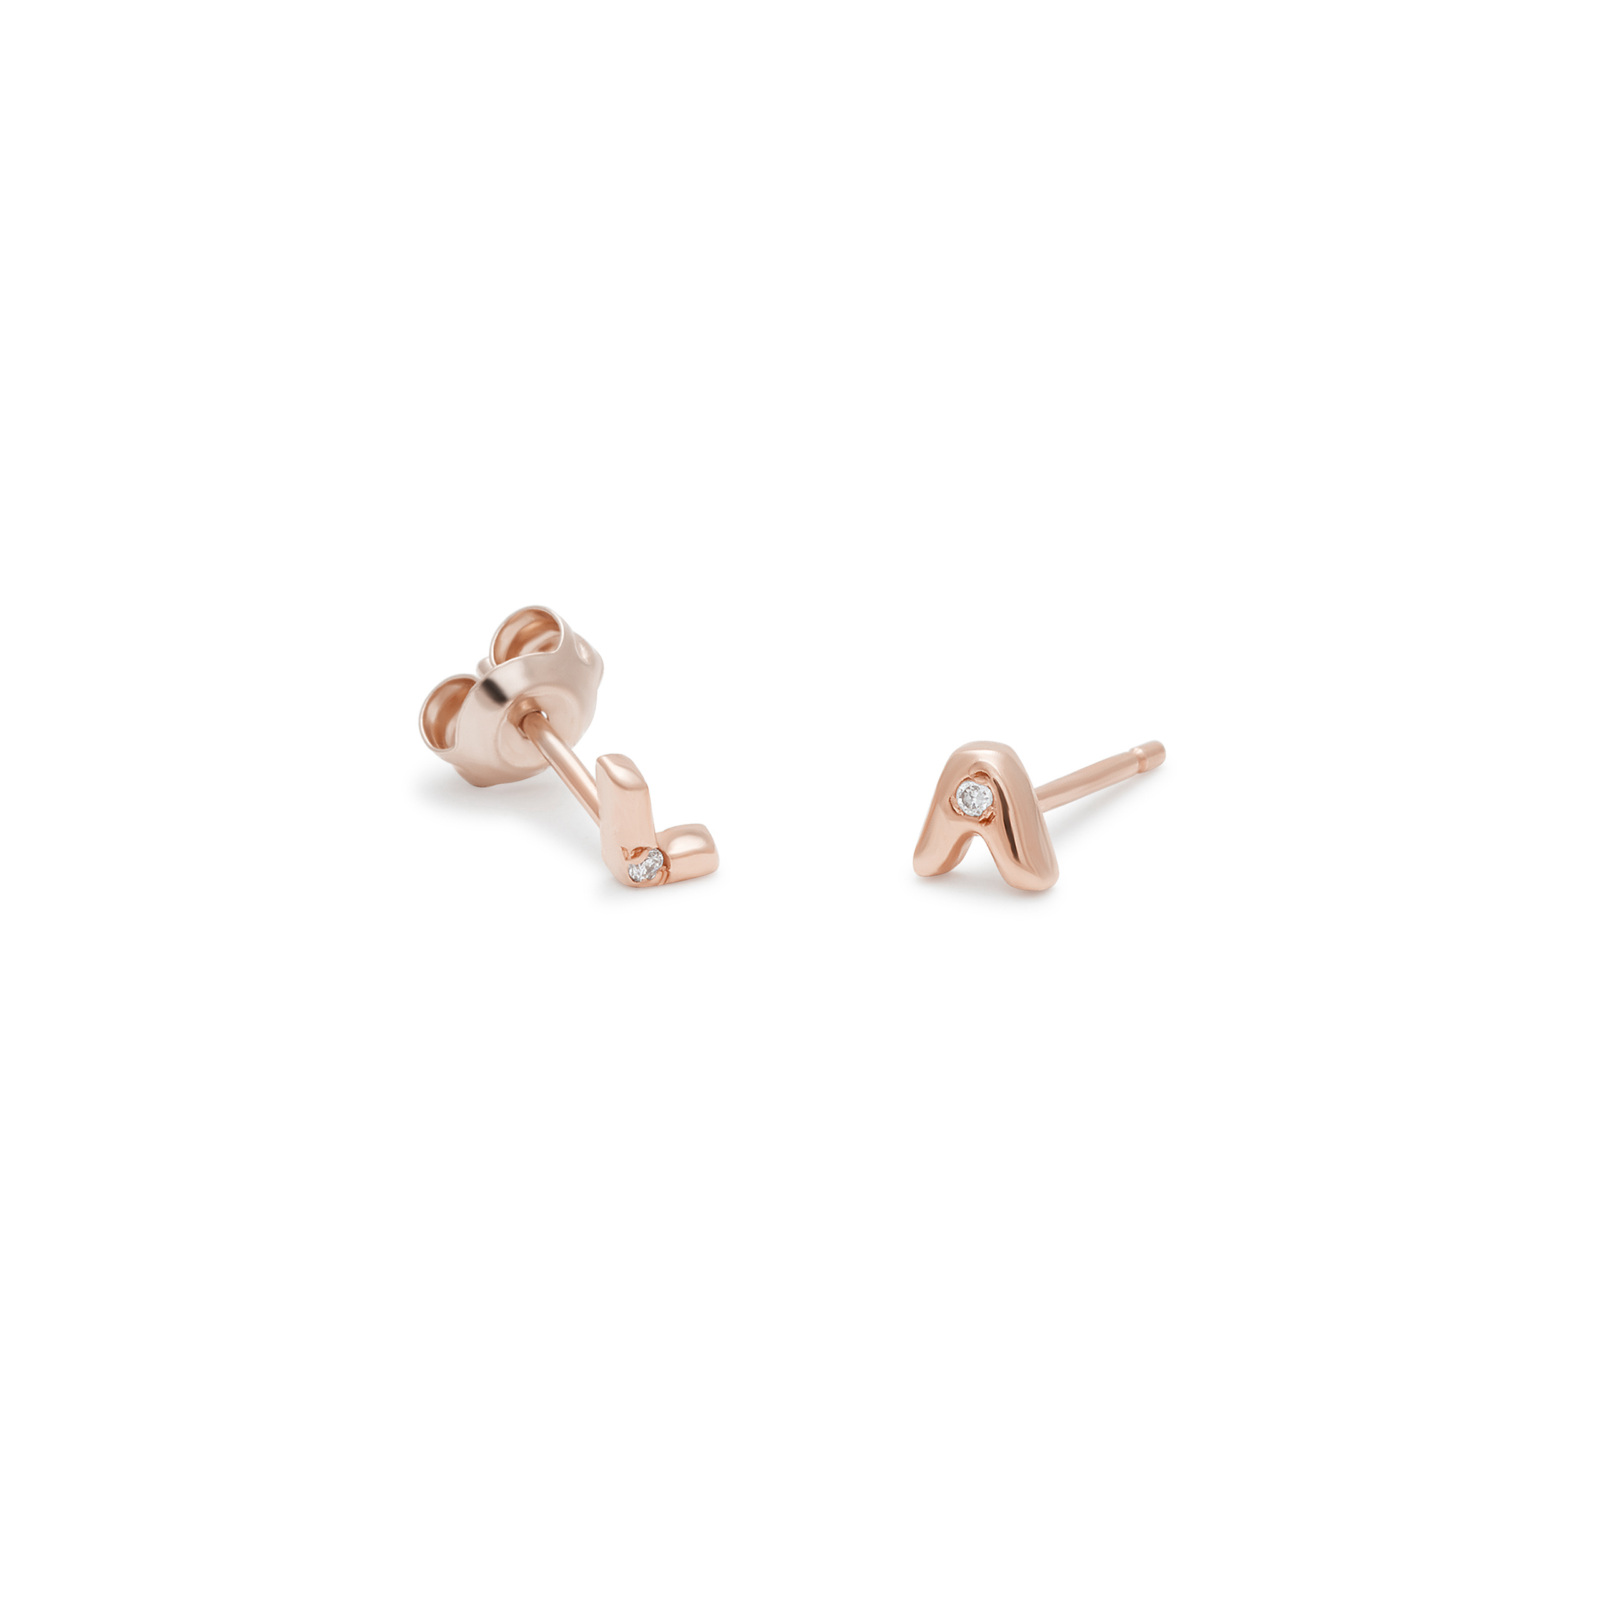 Letter Stud Earrings in 14k Pink Gold with White Diamonds